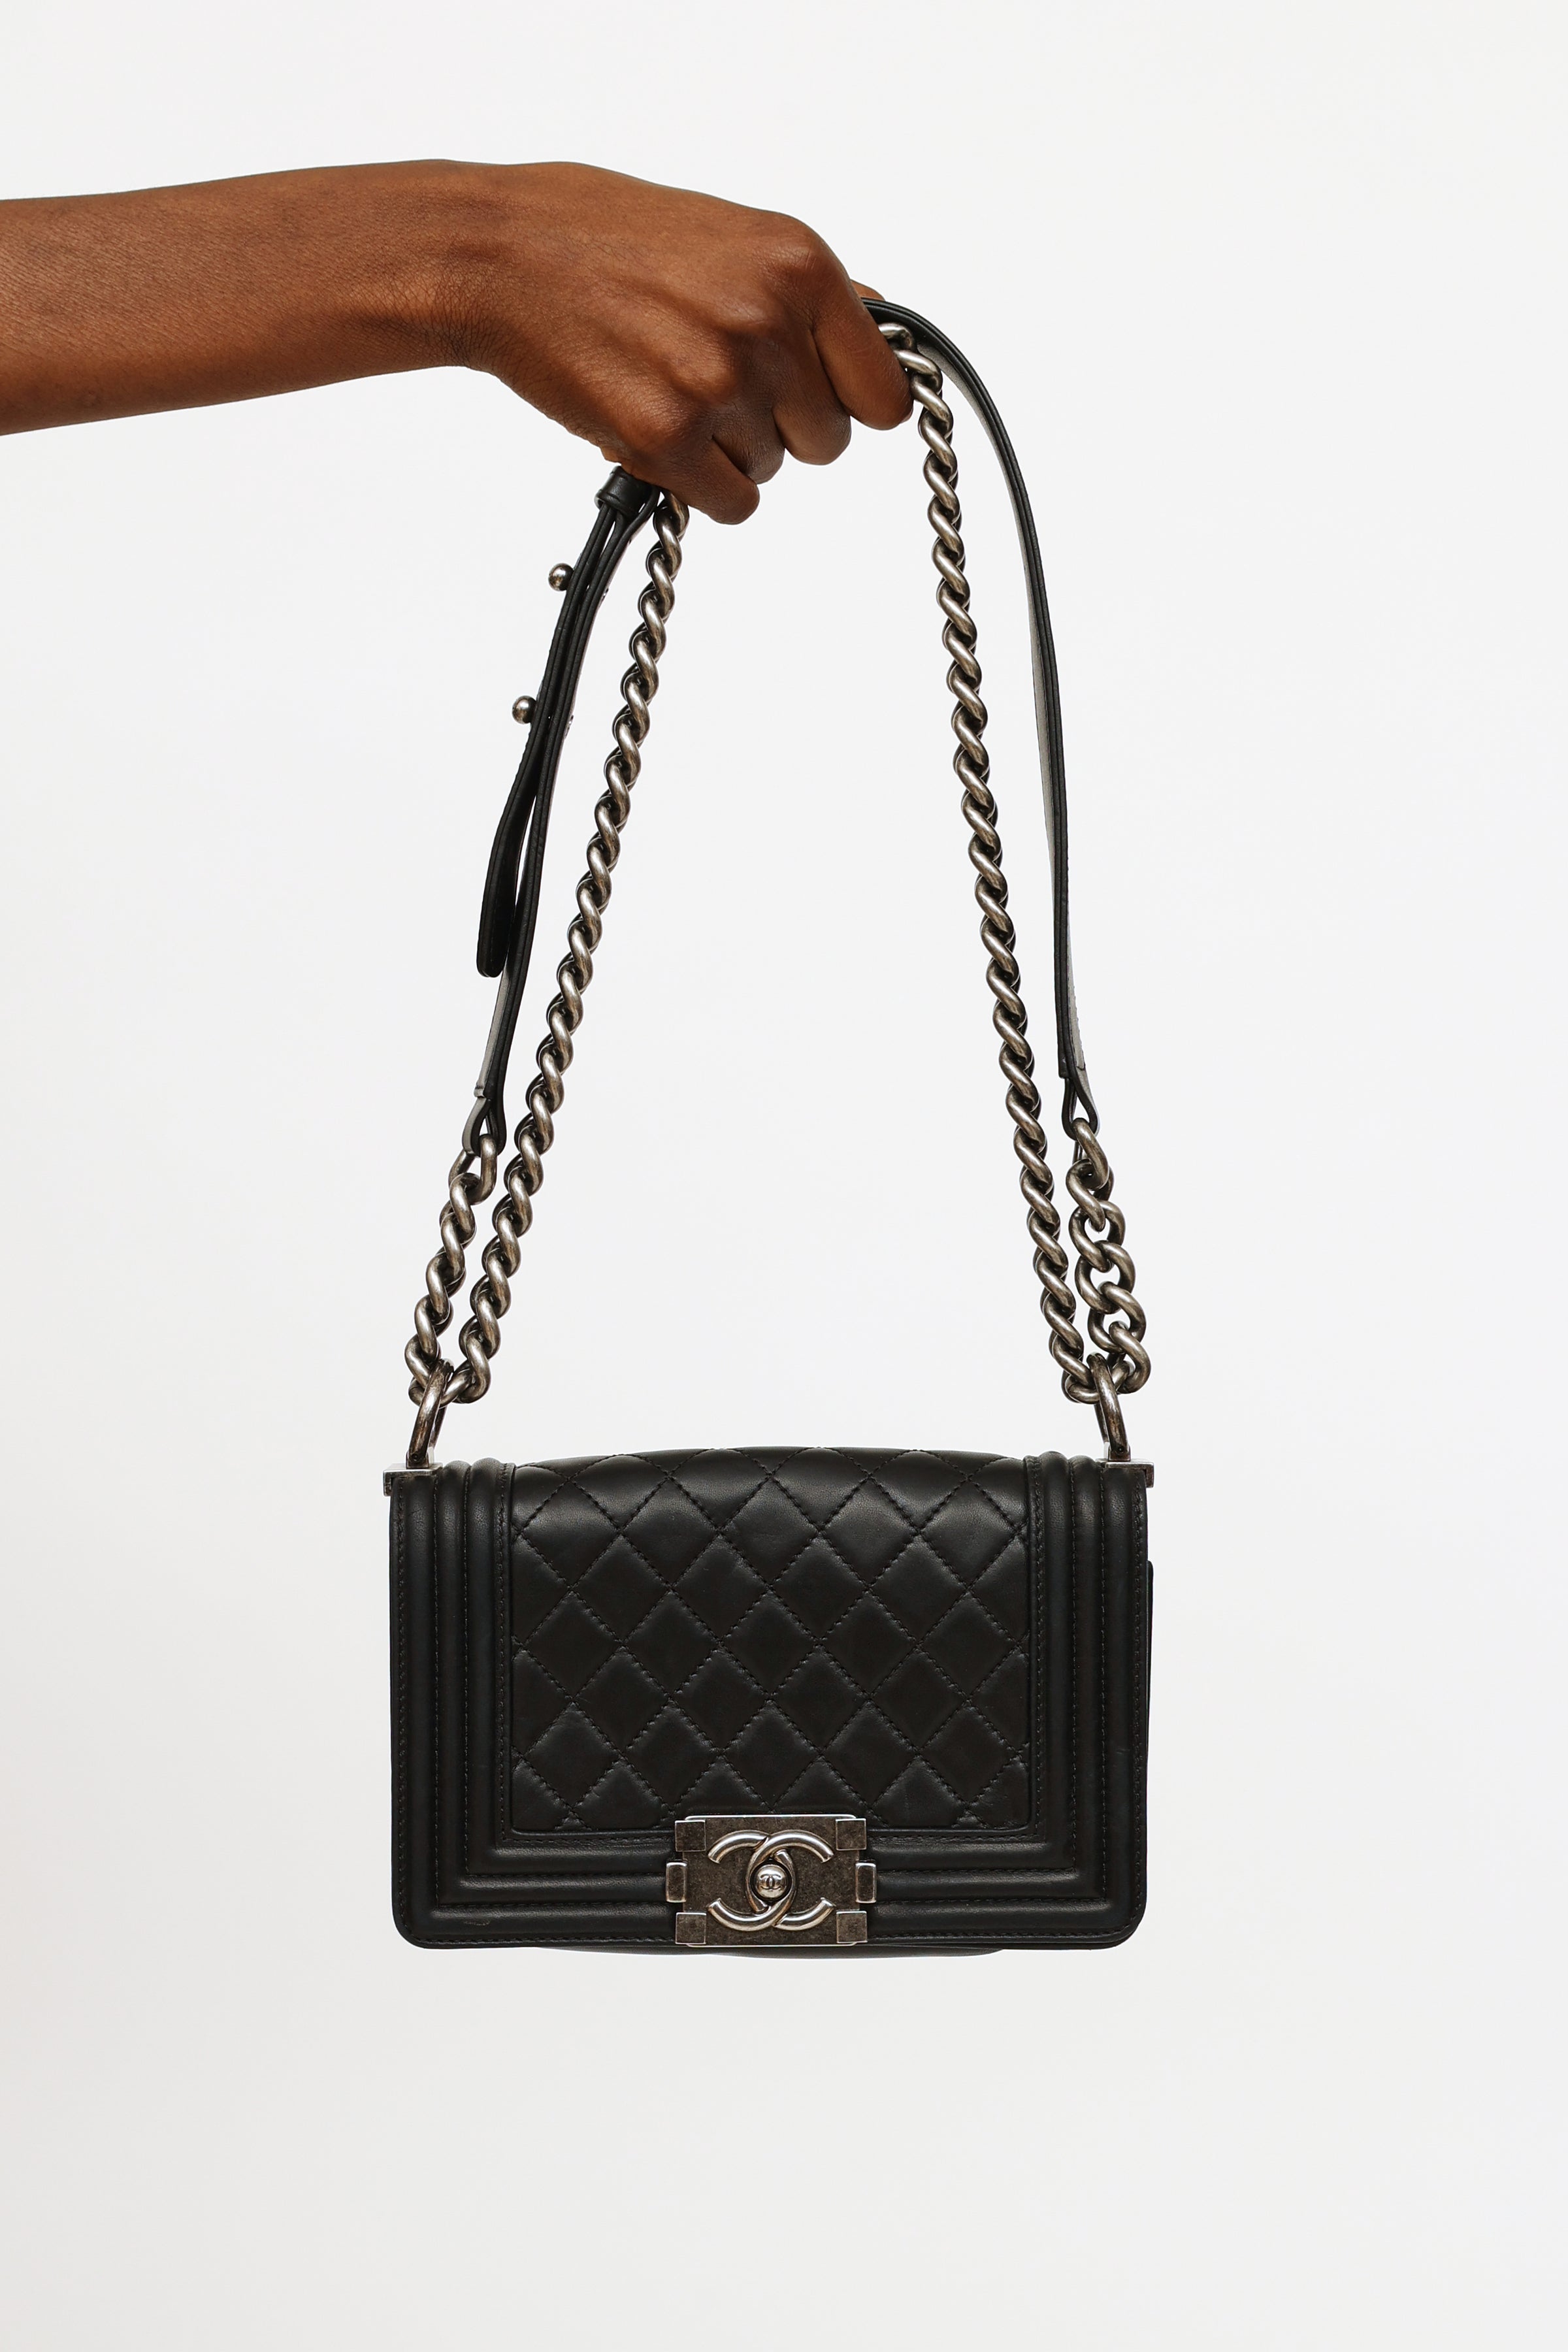 Chanel // 2012 Quilted Small Boy Handbag – VSP Consignment